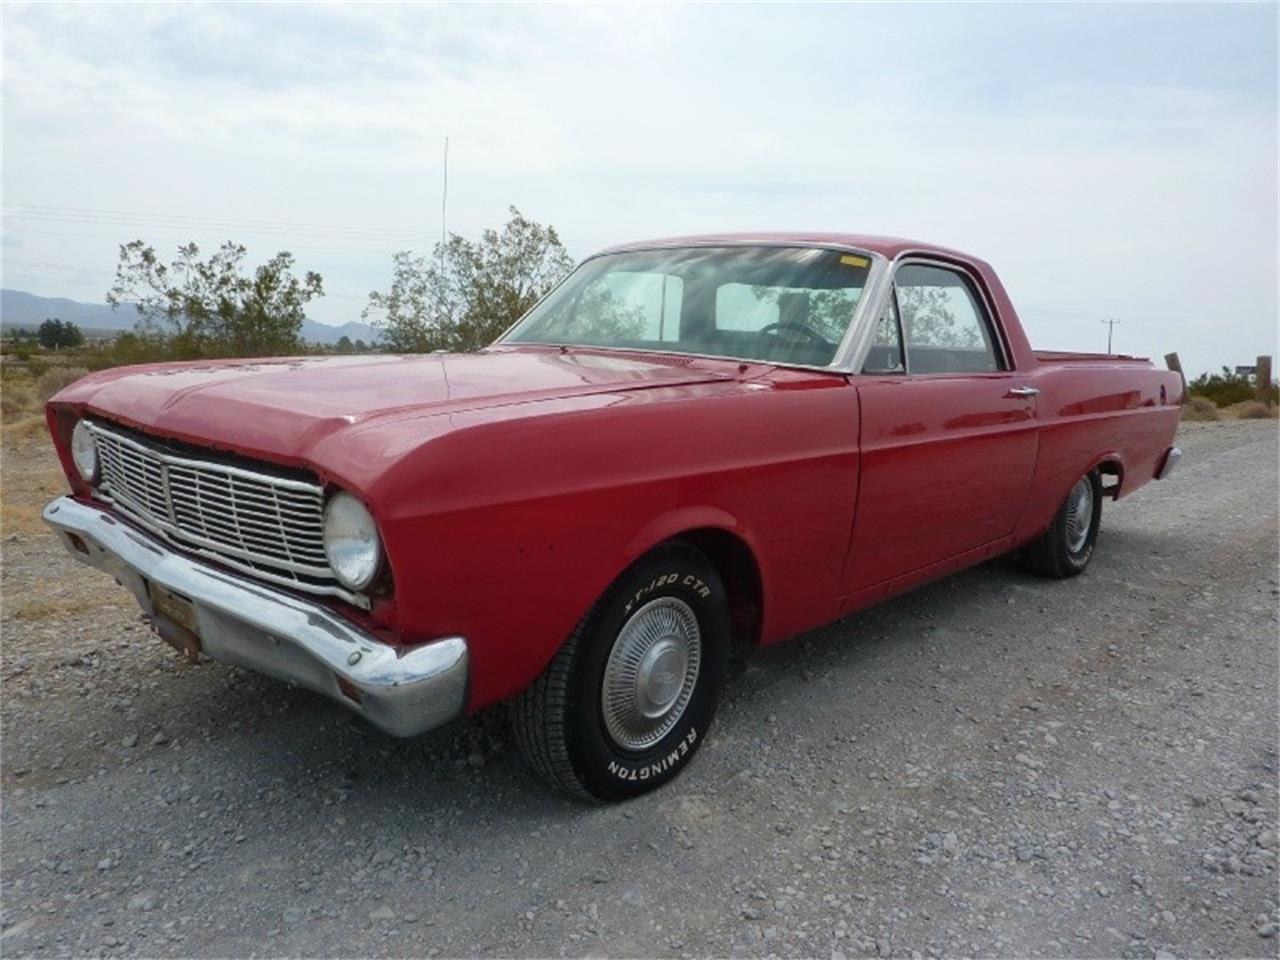 1966 ford ranchero for sale classiccars com cc 1025277 1966 ford ranchero for sale